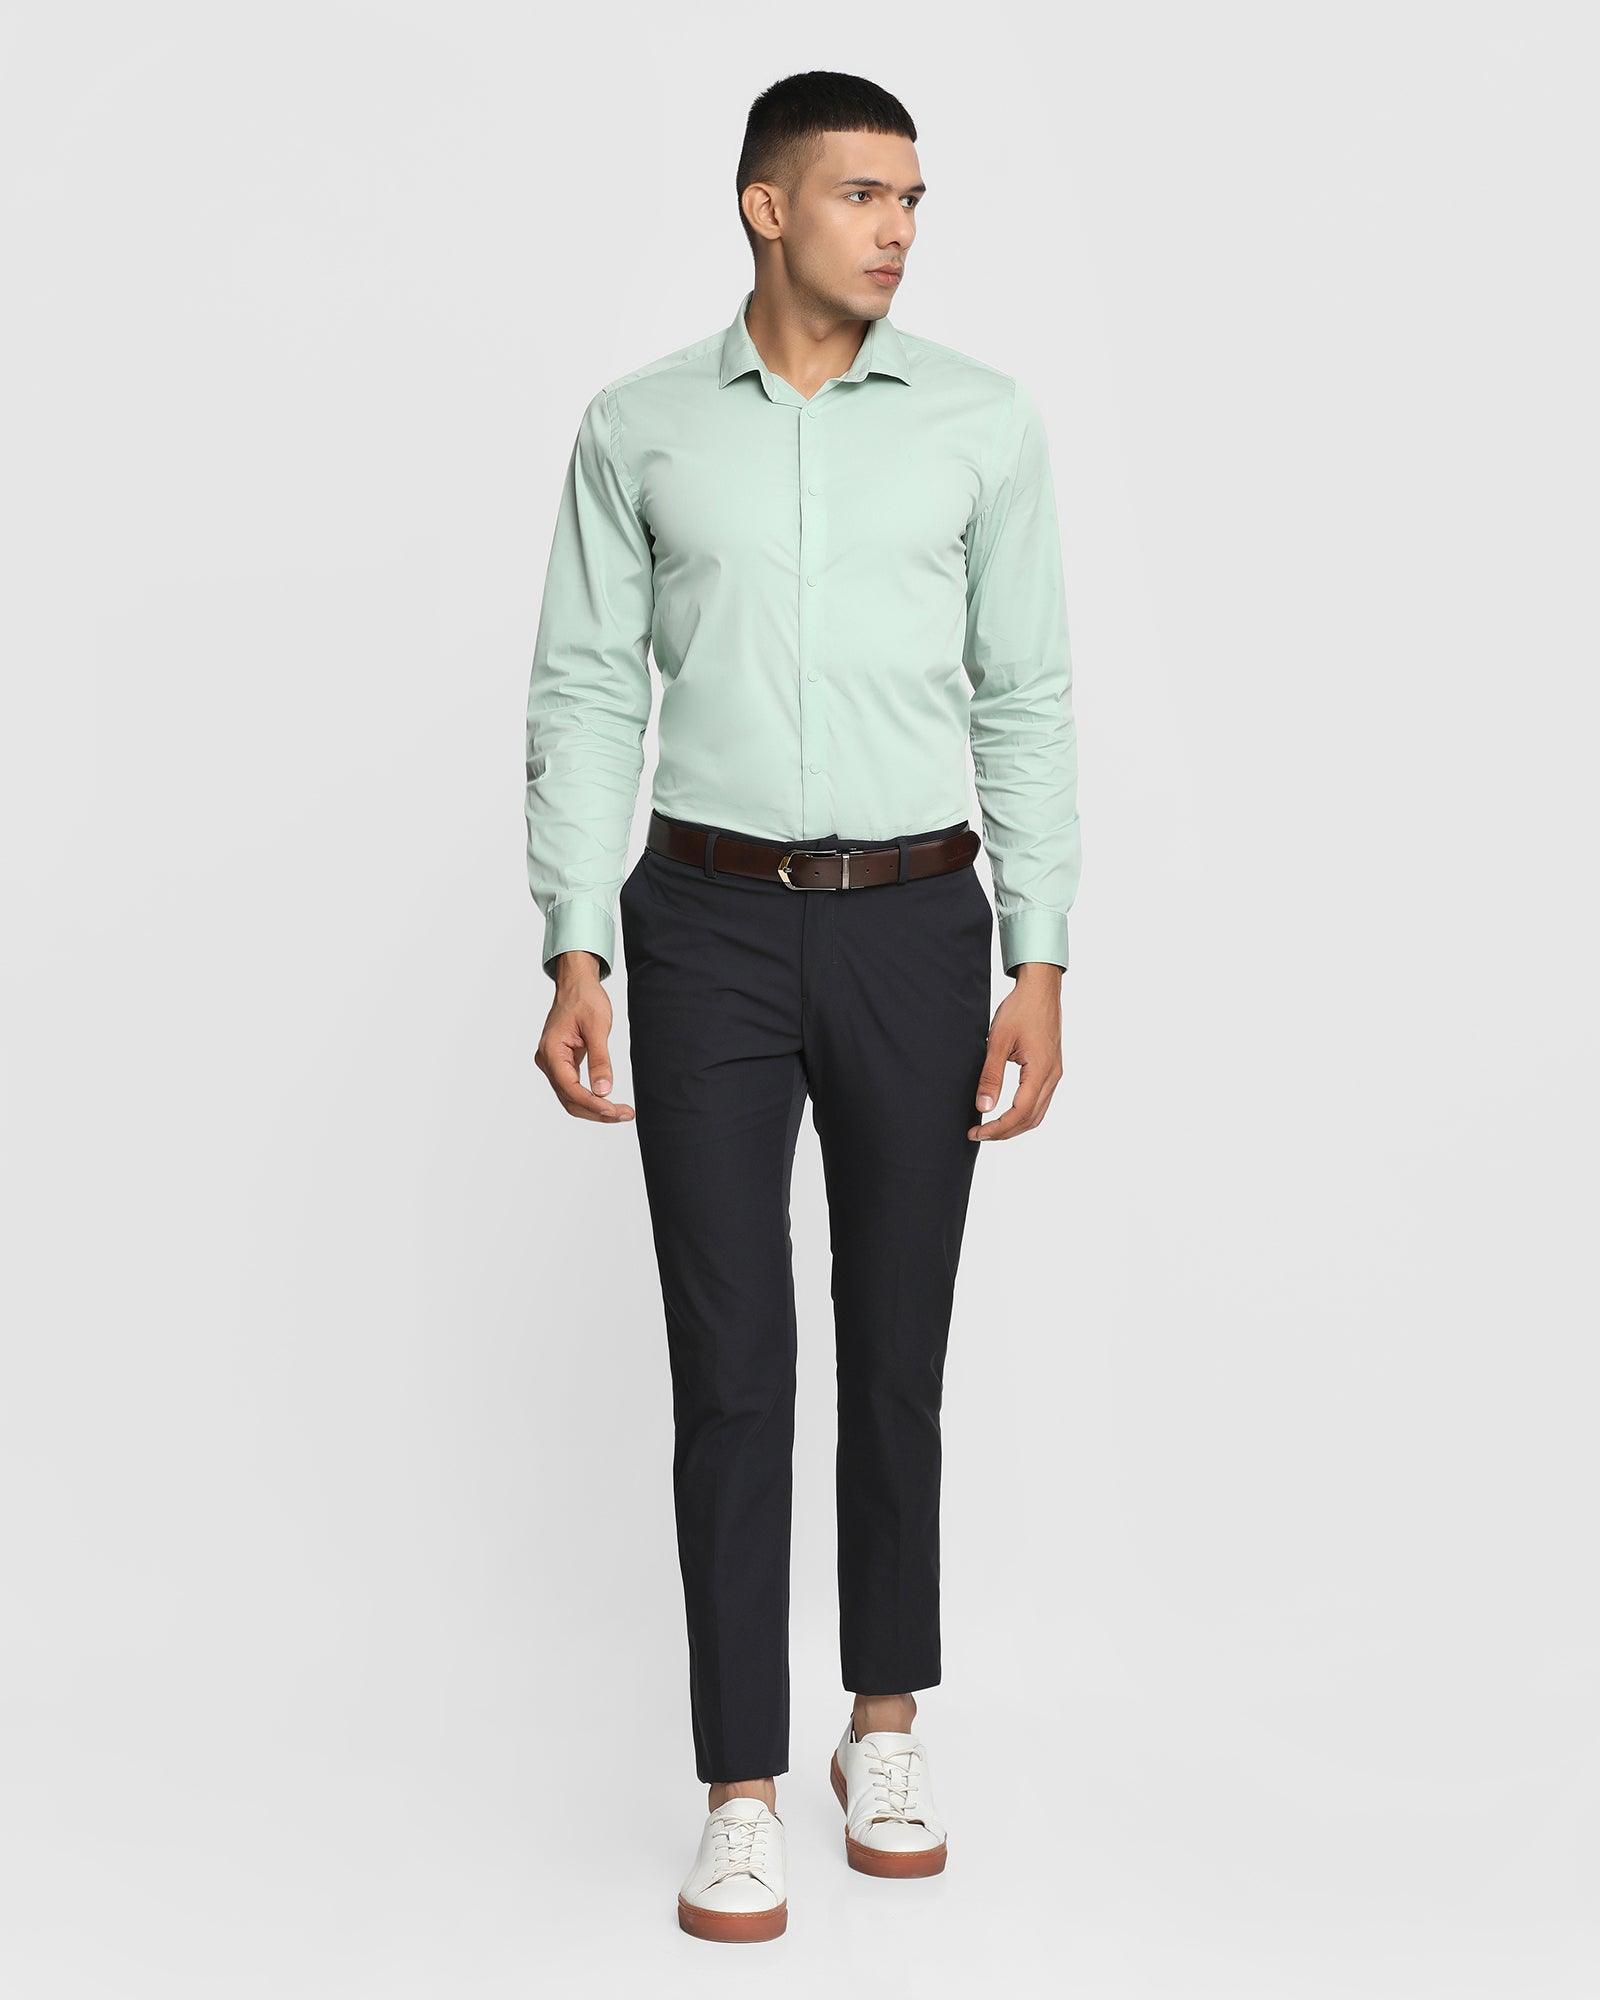 How to wear a light green pant! Mint jeans | Green pants outfit, Wear to  work dress, Business casual outfits for work